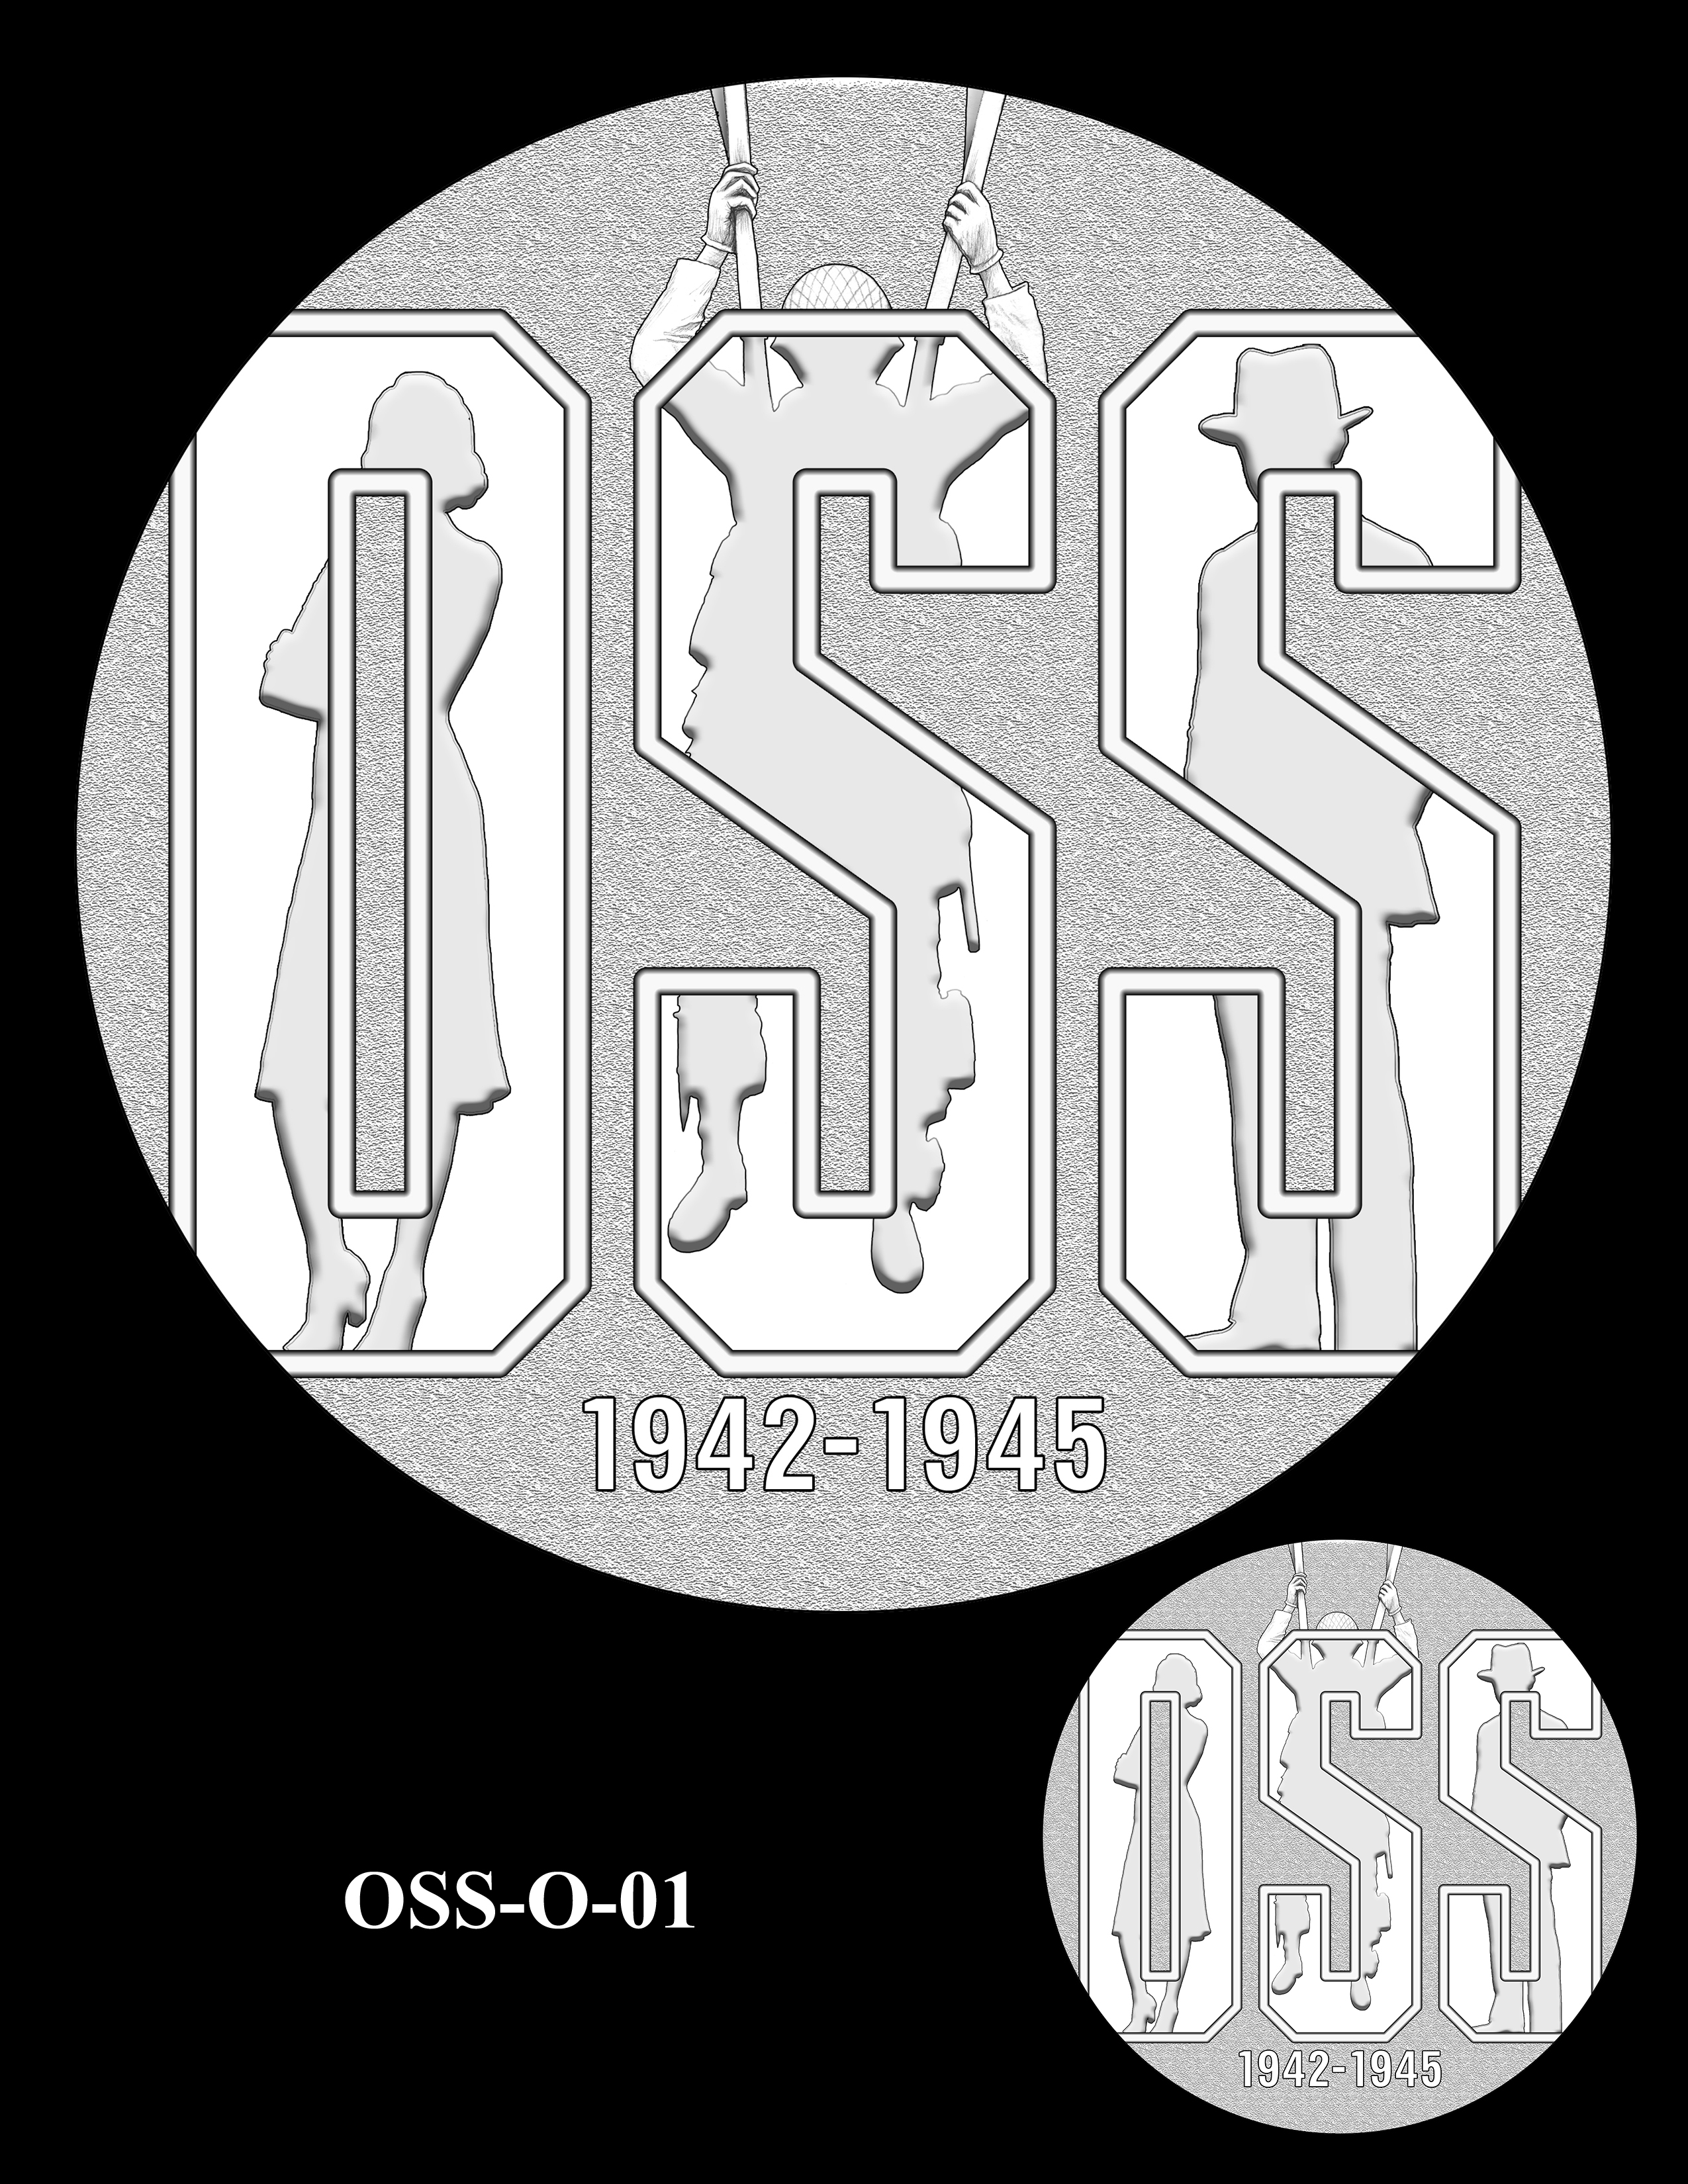 OSS-O-01 -- Office of Strategic Services Congressional Gold Medal